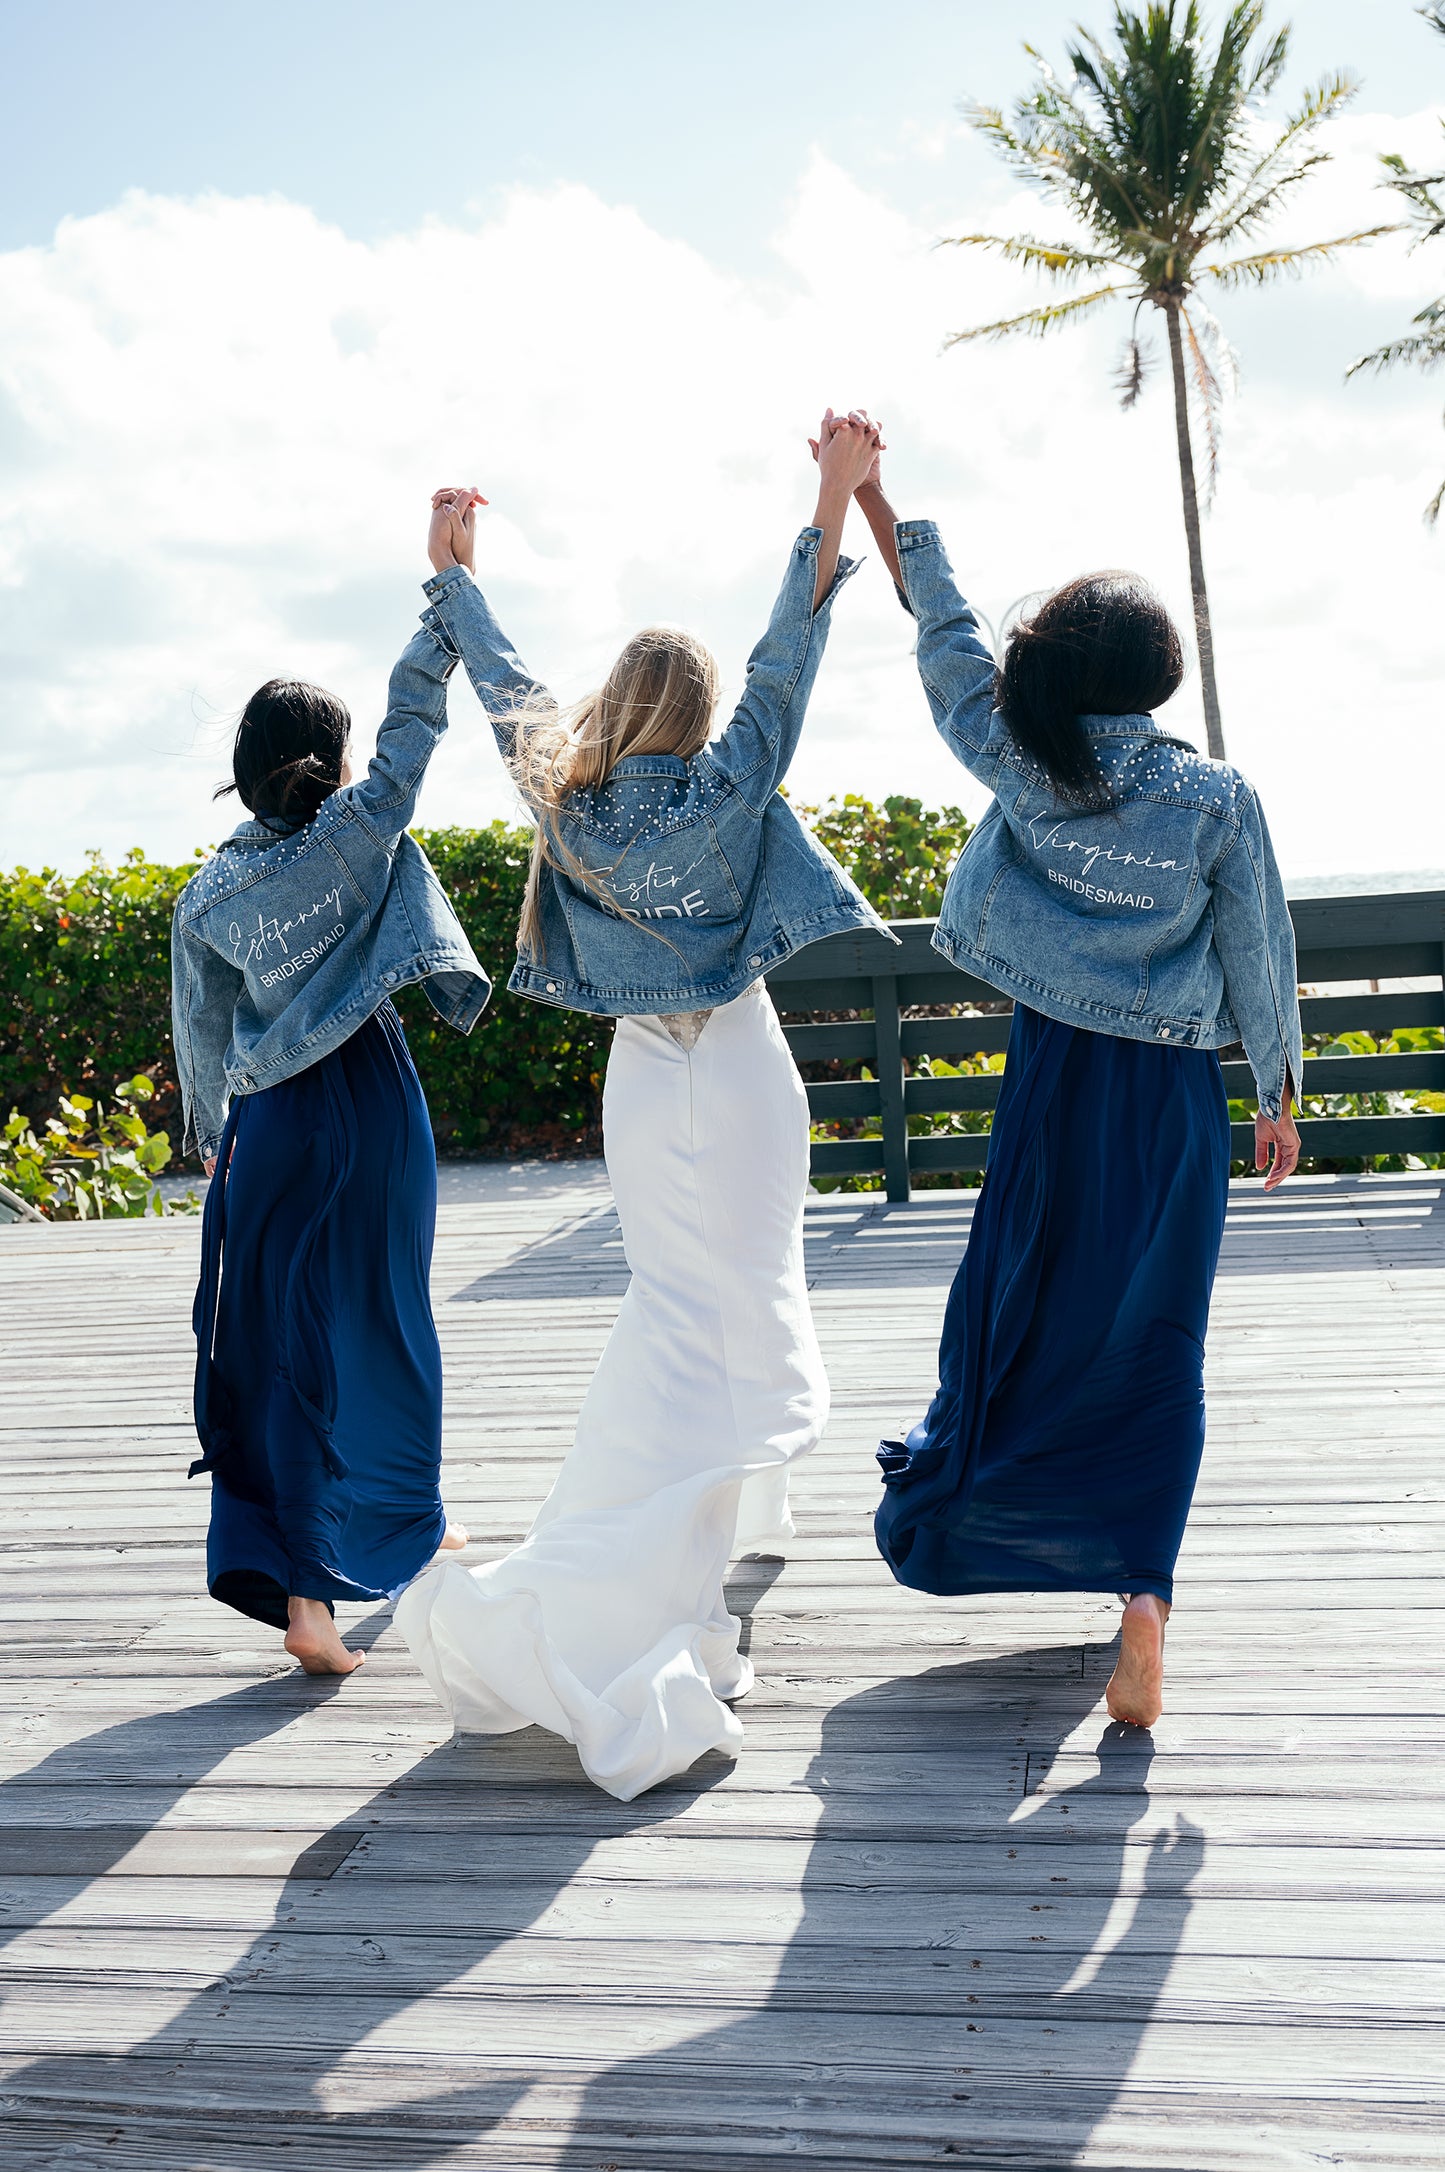 Custom Denim Jackets with Pearls for Bride and Bridesmaids - alfresco / bold